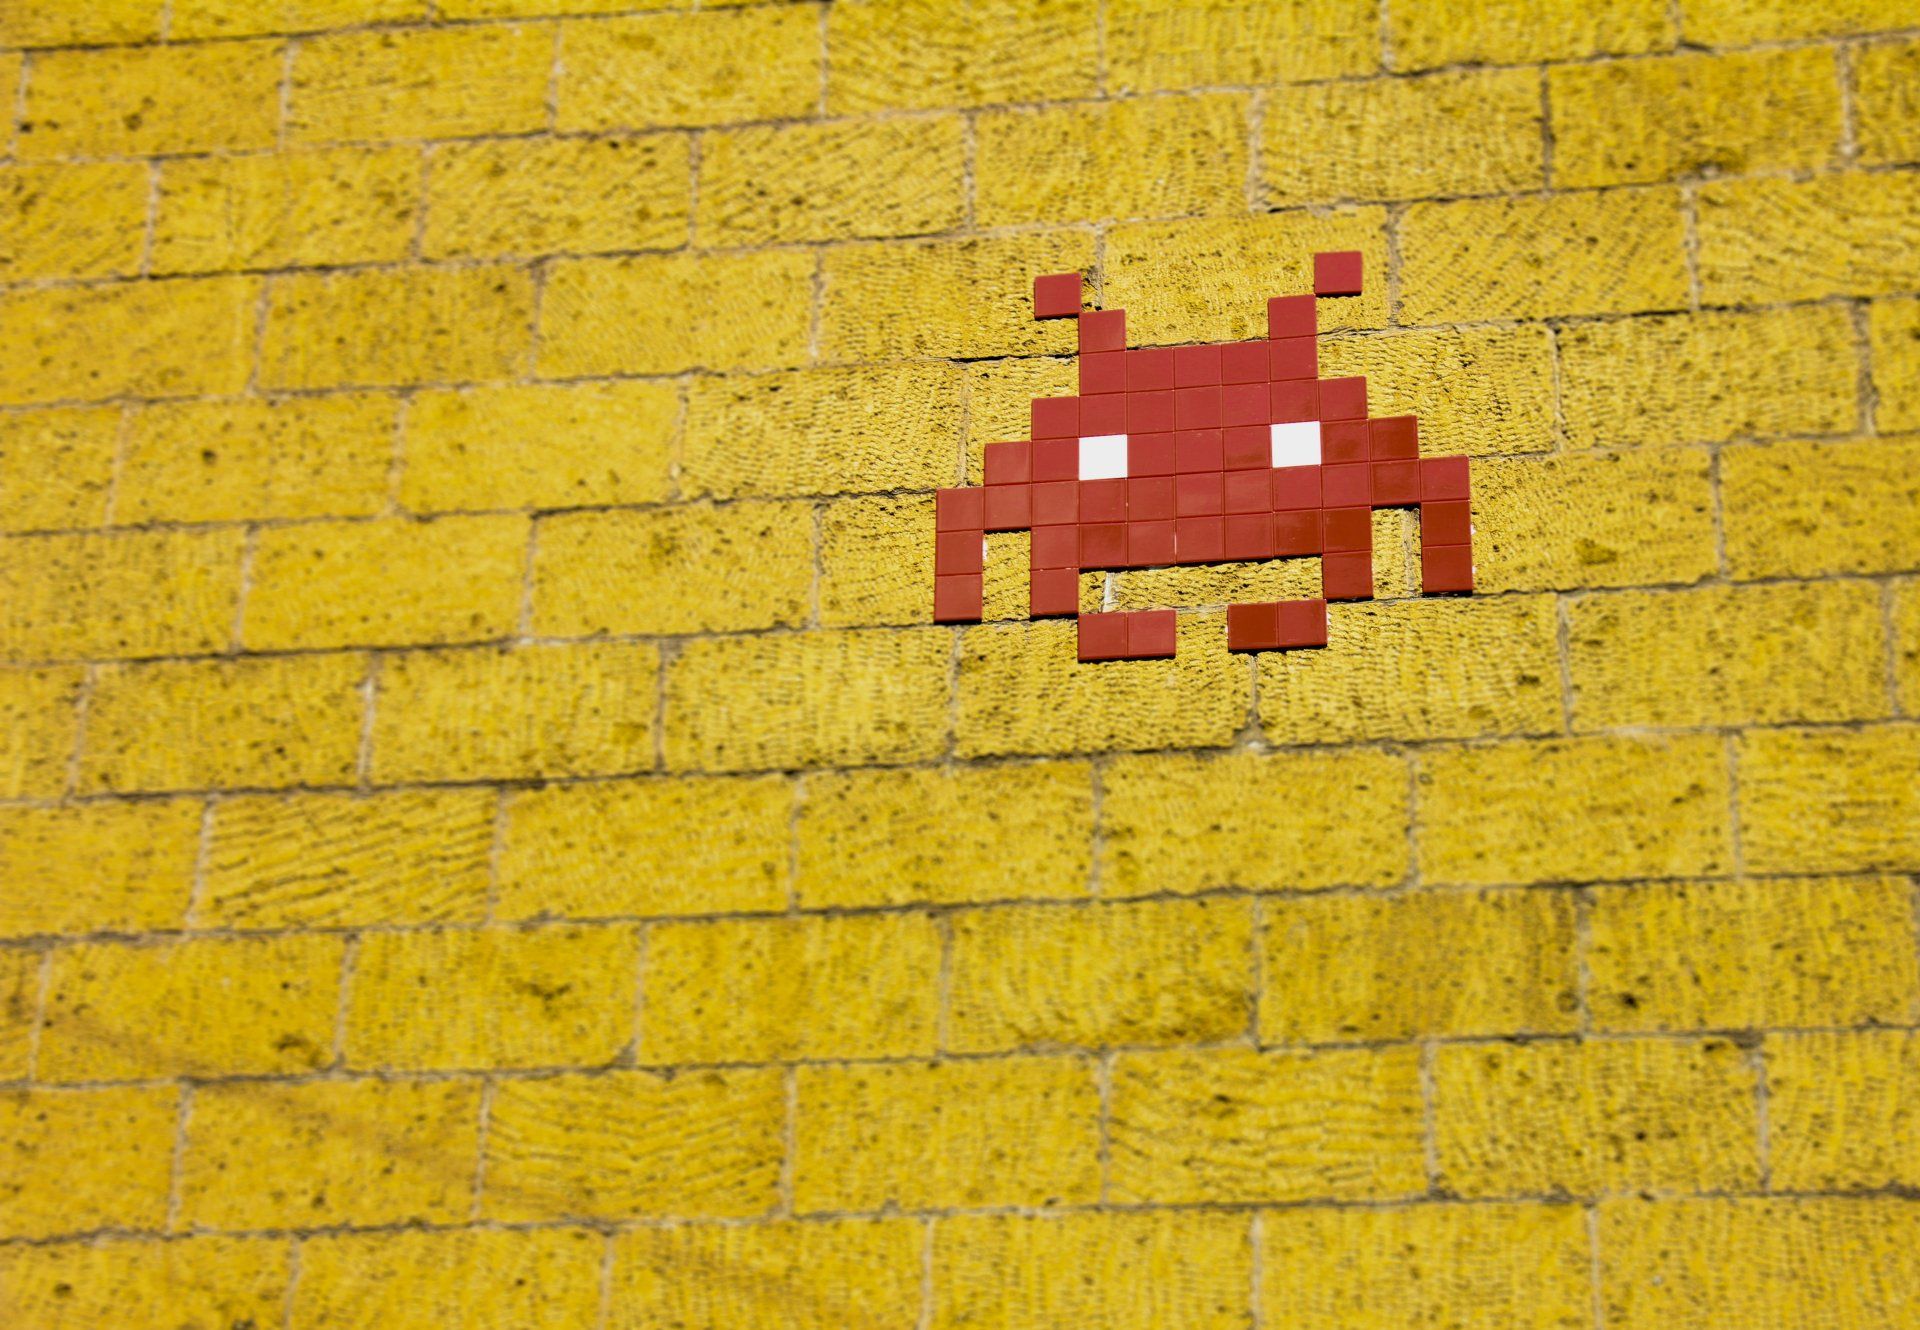 A space invader graphic on a wall in this cool photo